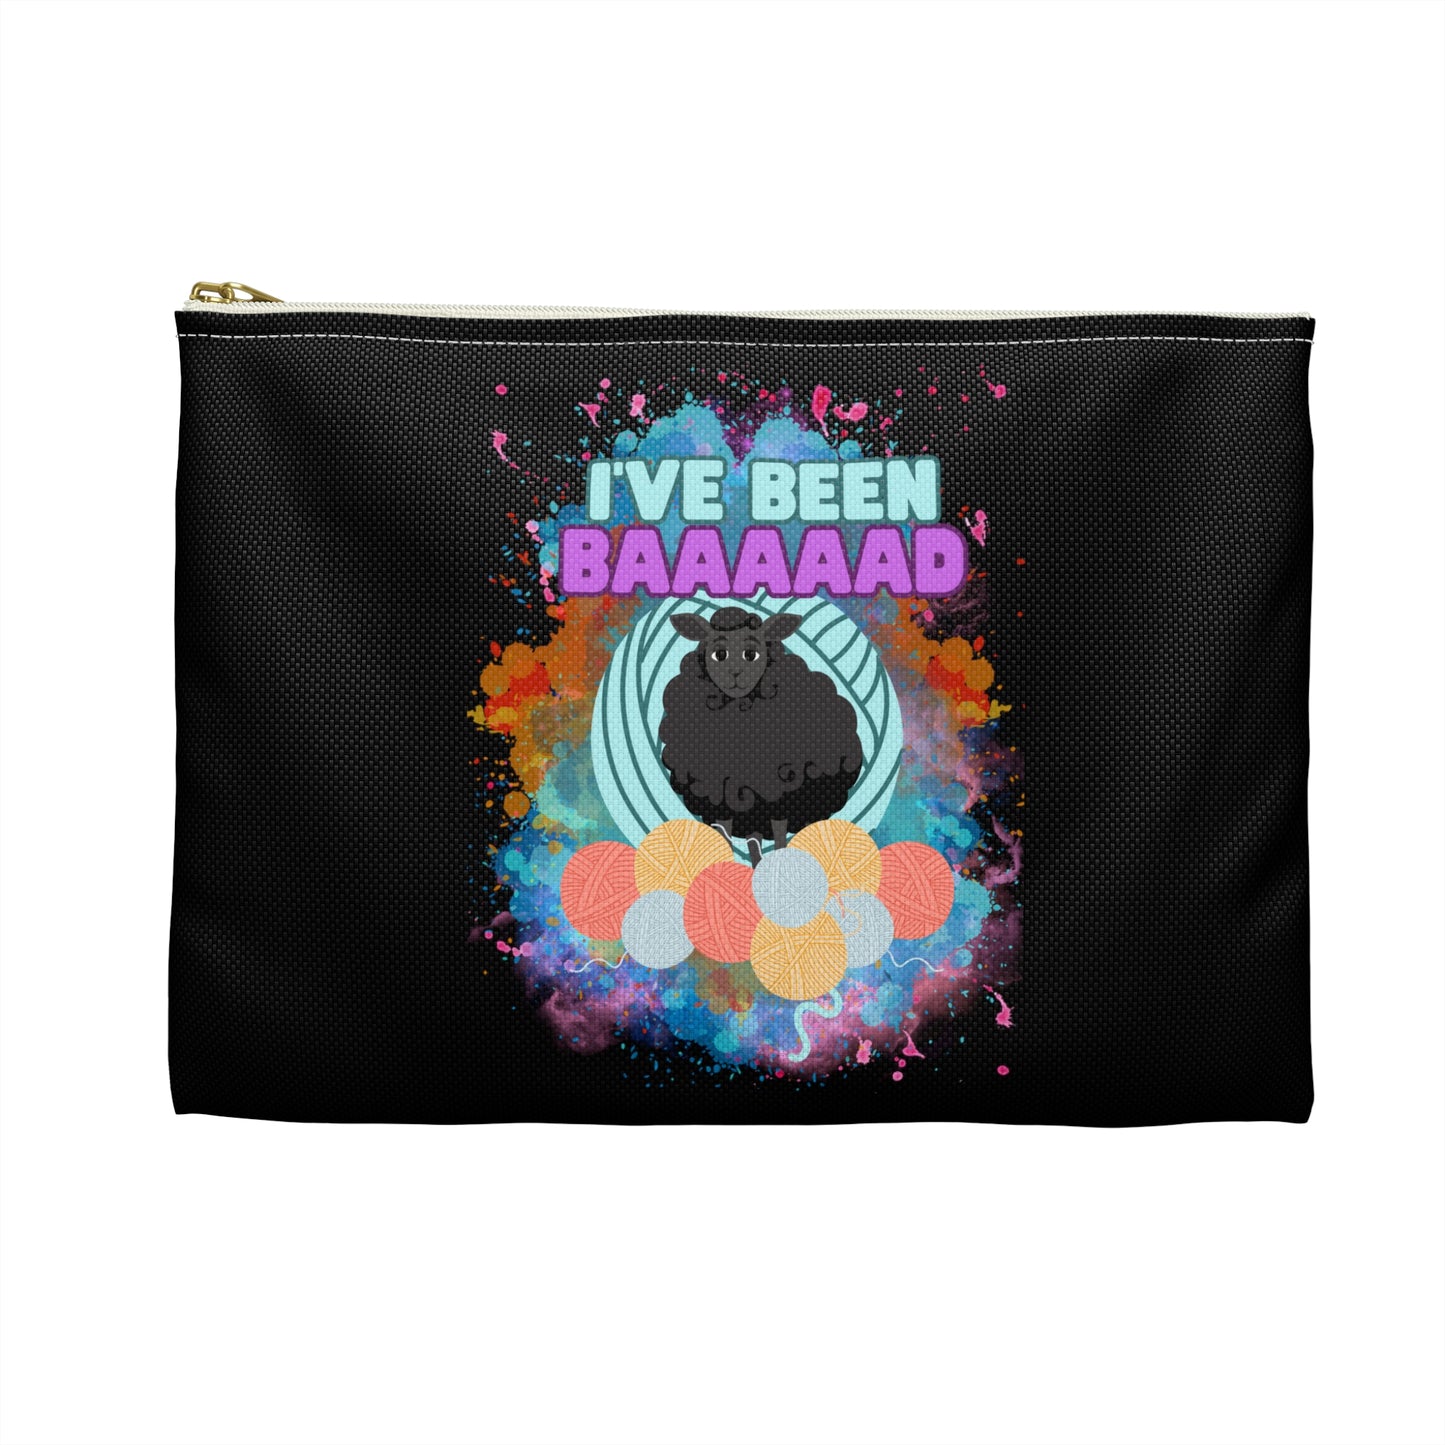 Baaad Accessory Pouch